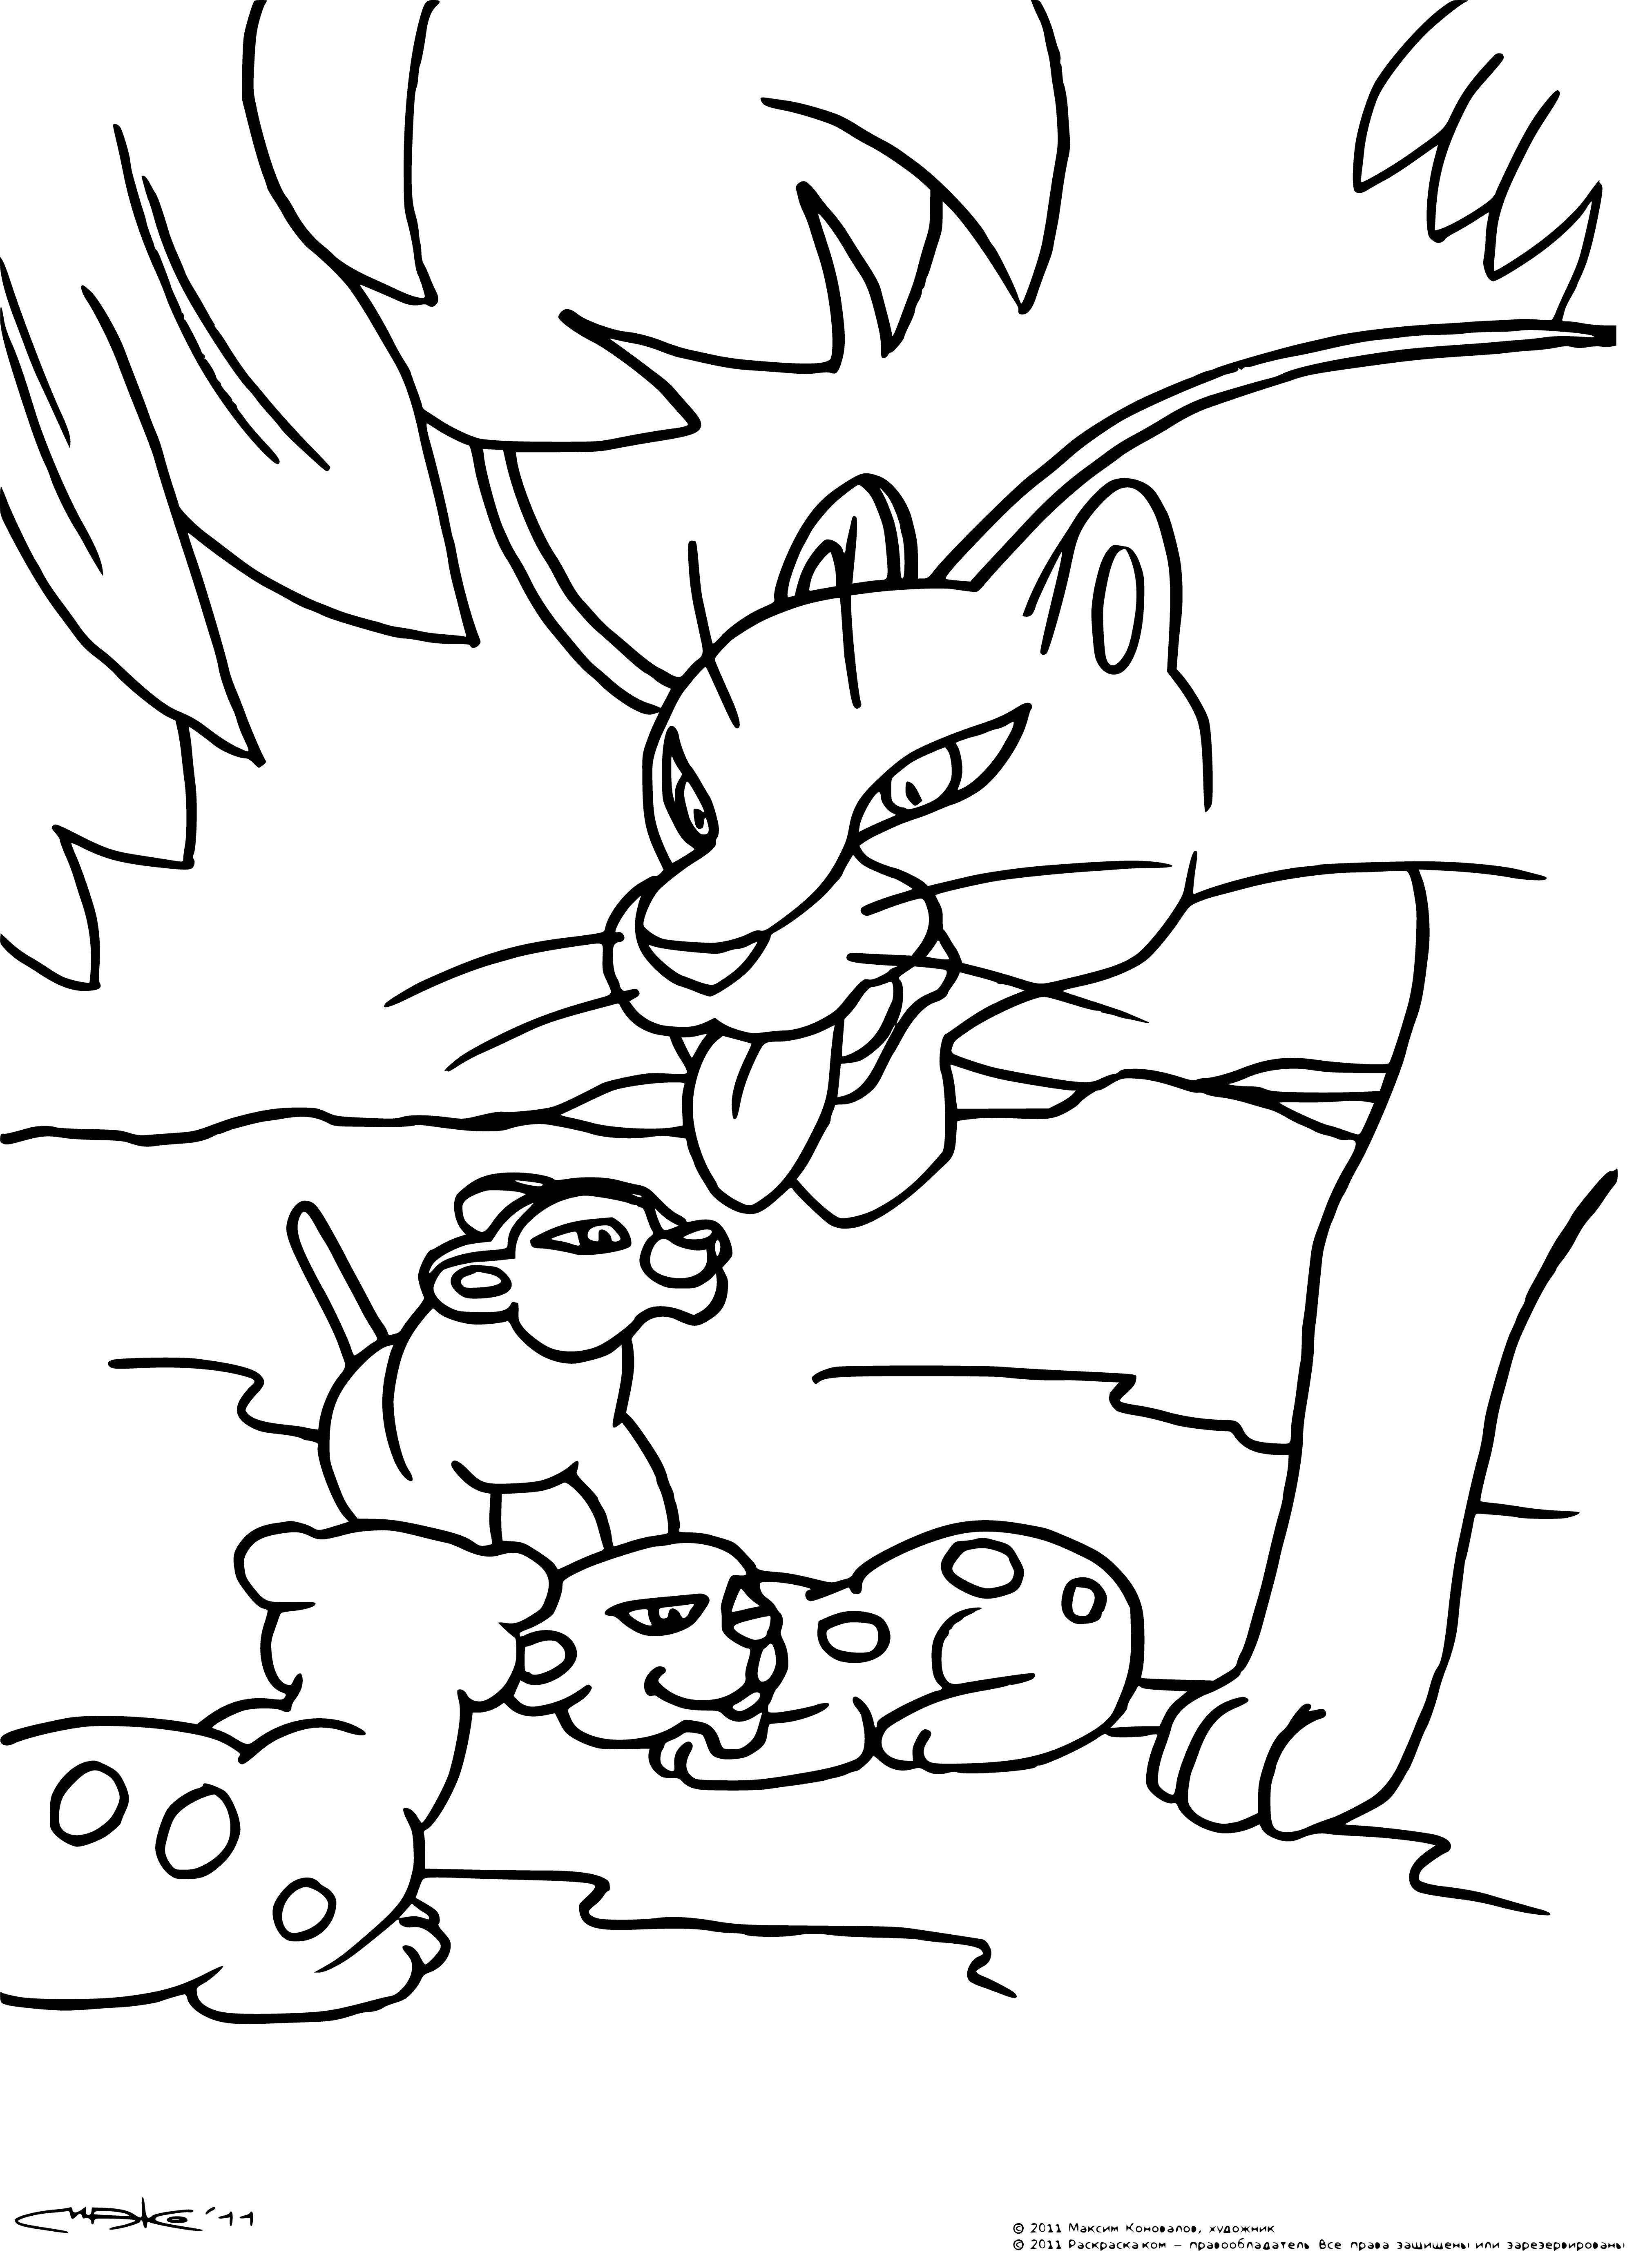 coloring page: Mowgli visits Bagheera's cubs, both looking happy; Mowgli cradles one in his arms.